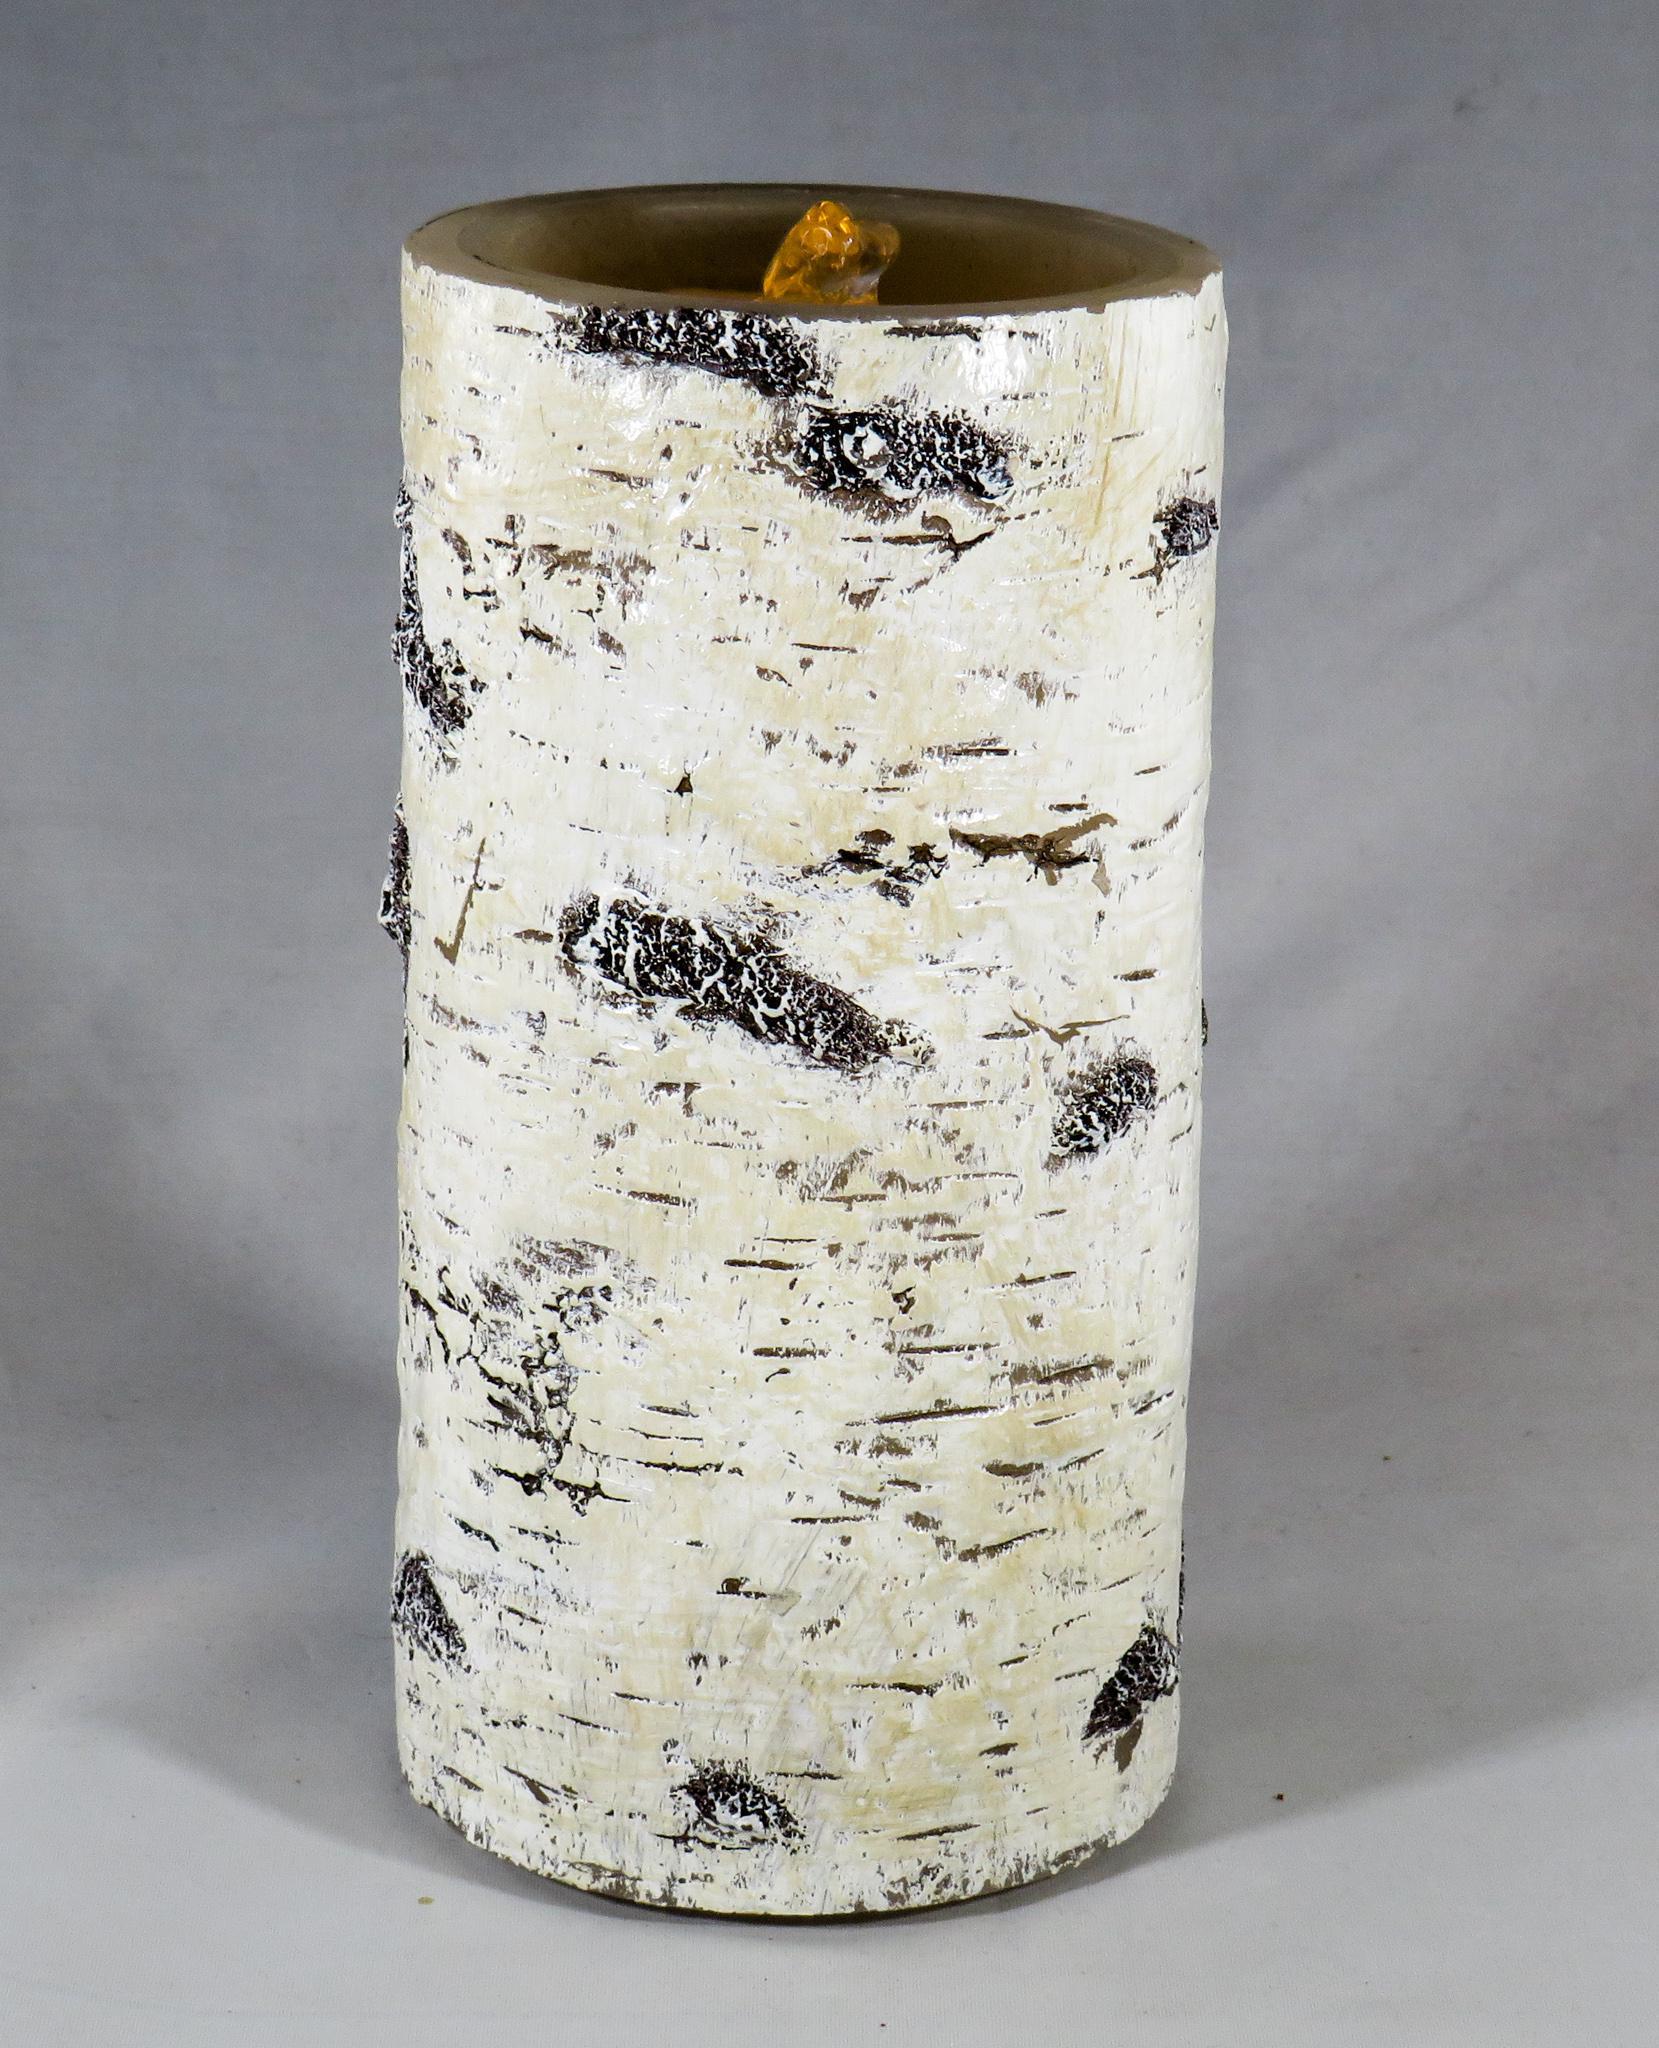 BIRCH Water Wick Candle: Serene Ambience to Your Space